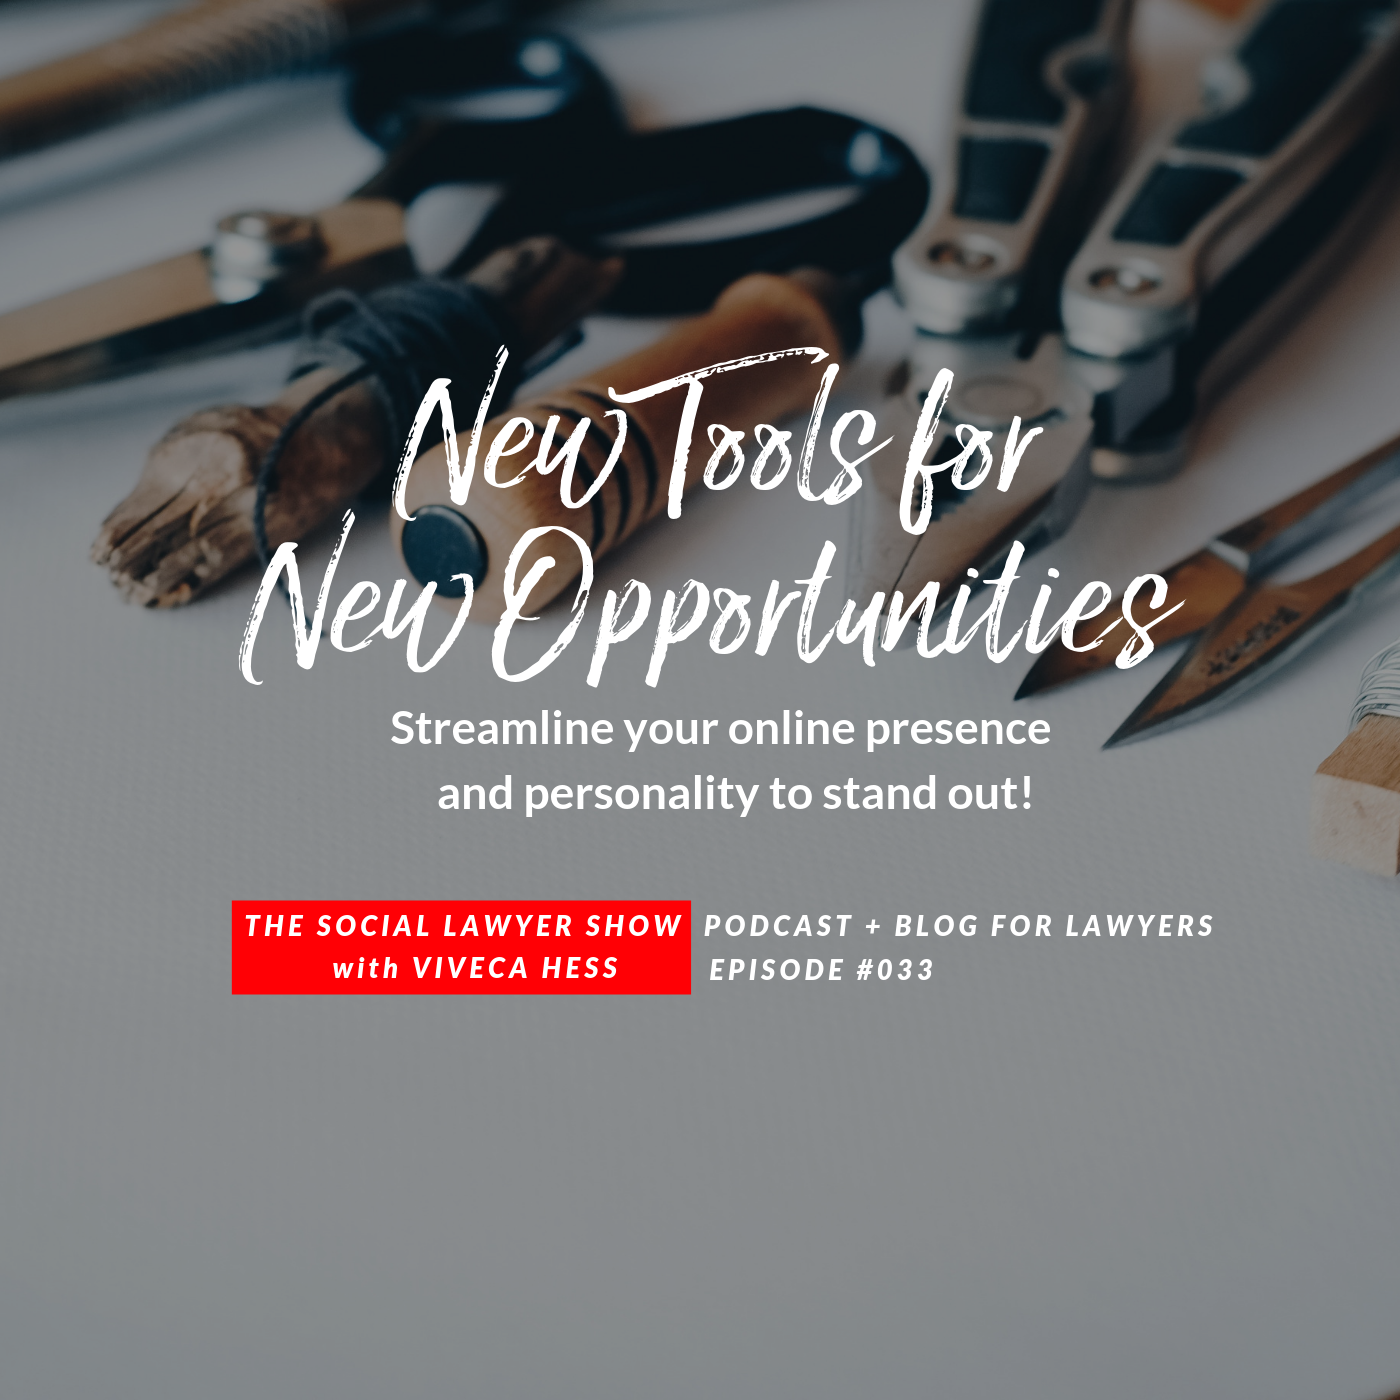 New Tools, New Opportunities for Lawyers